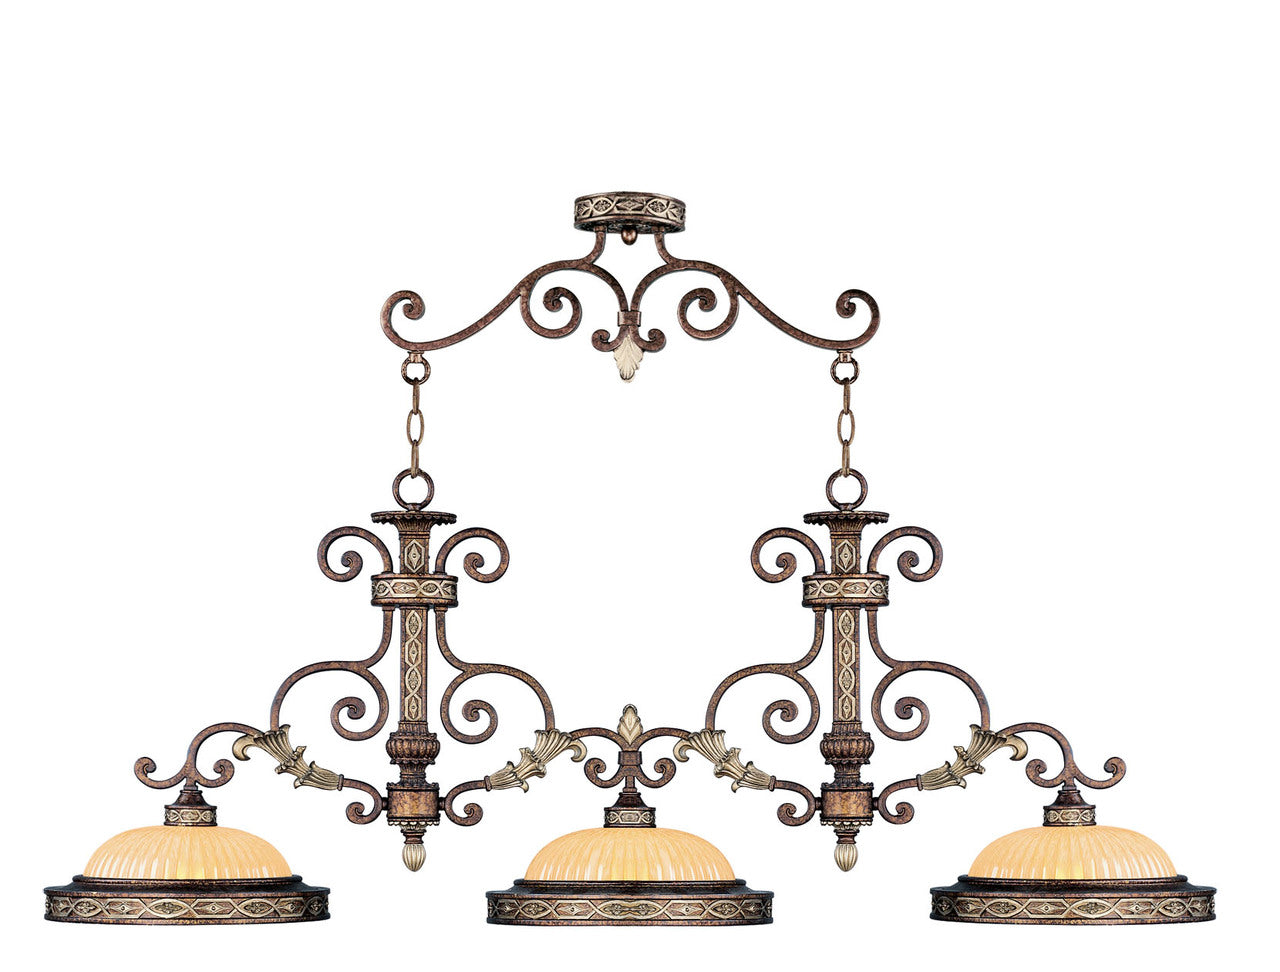 LIVEX Lighting 8546-64 Seville Island Light in Palacial Bronze with Gilded Accents (3 Light)